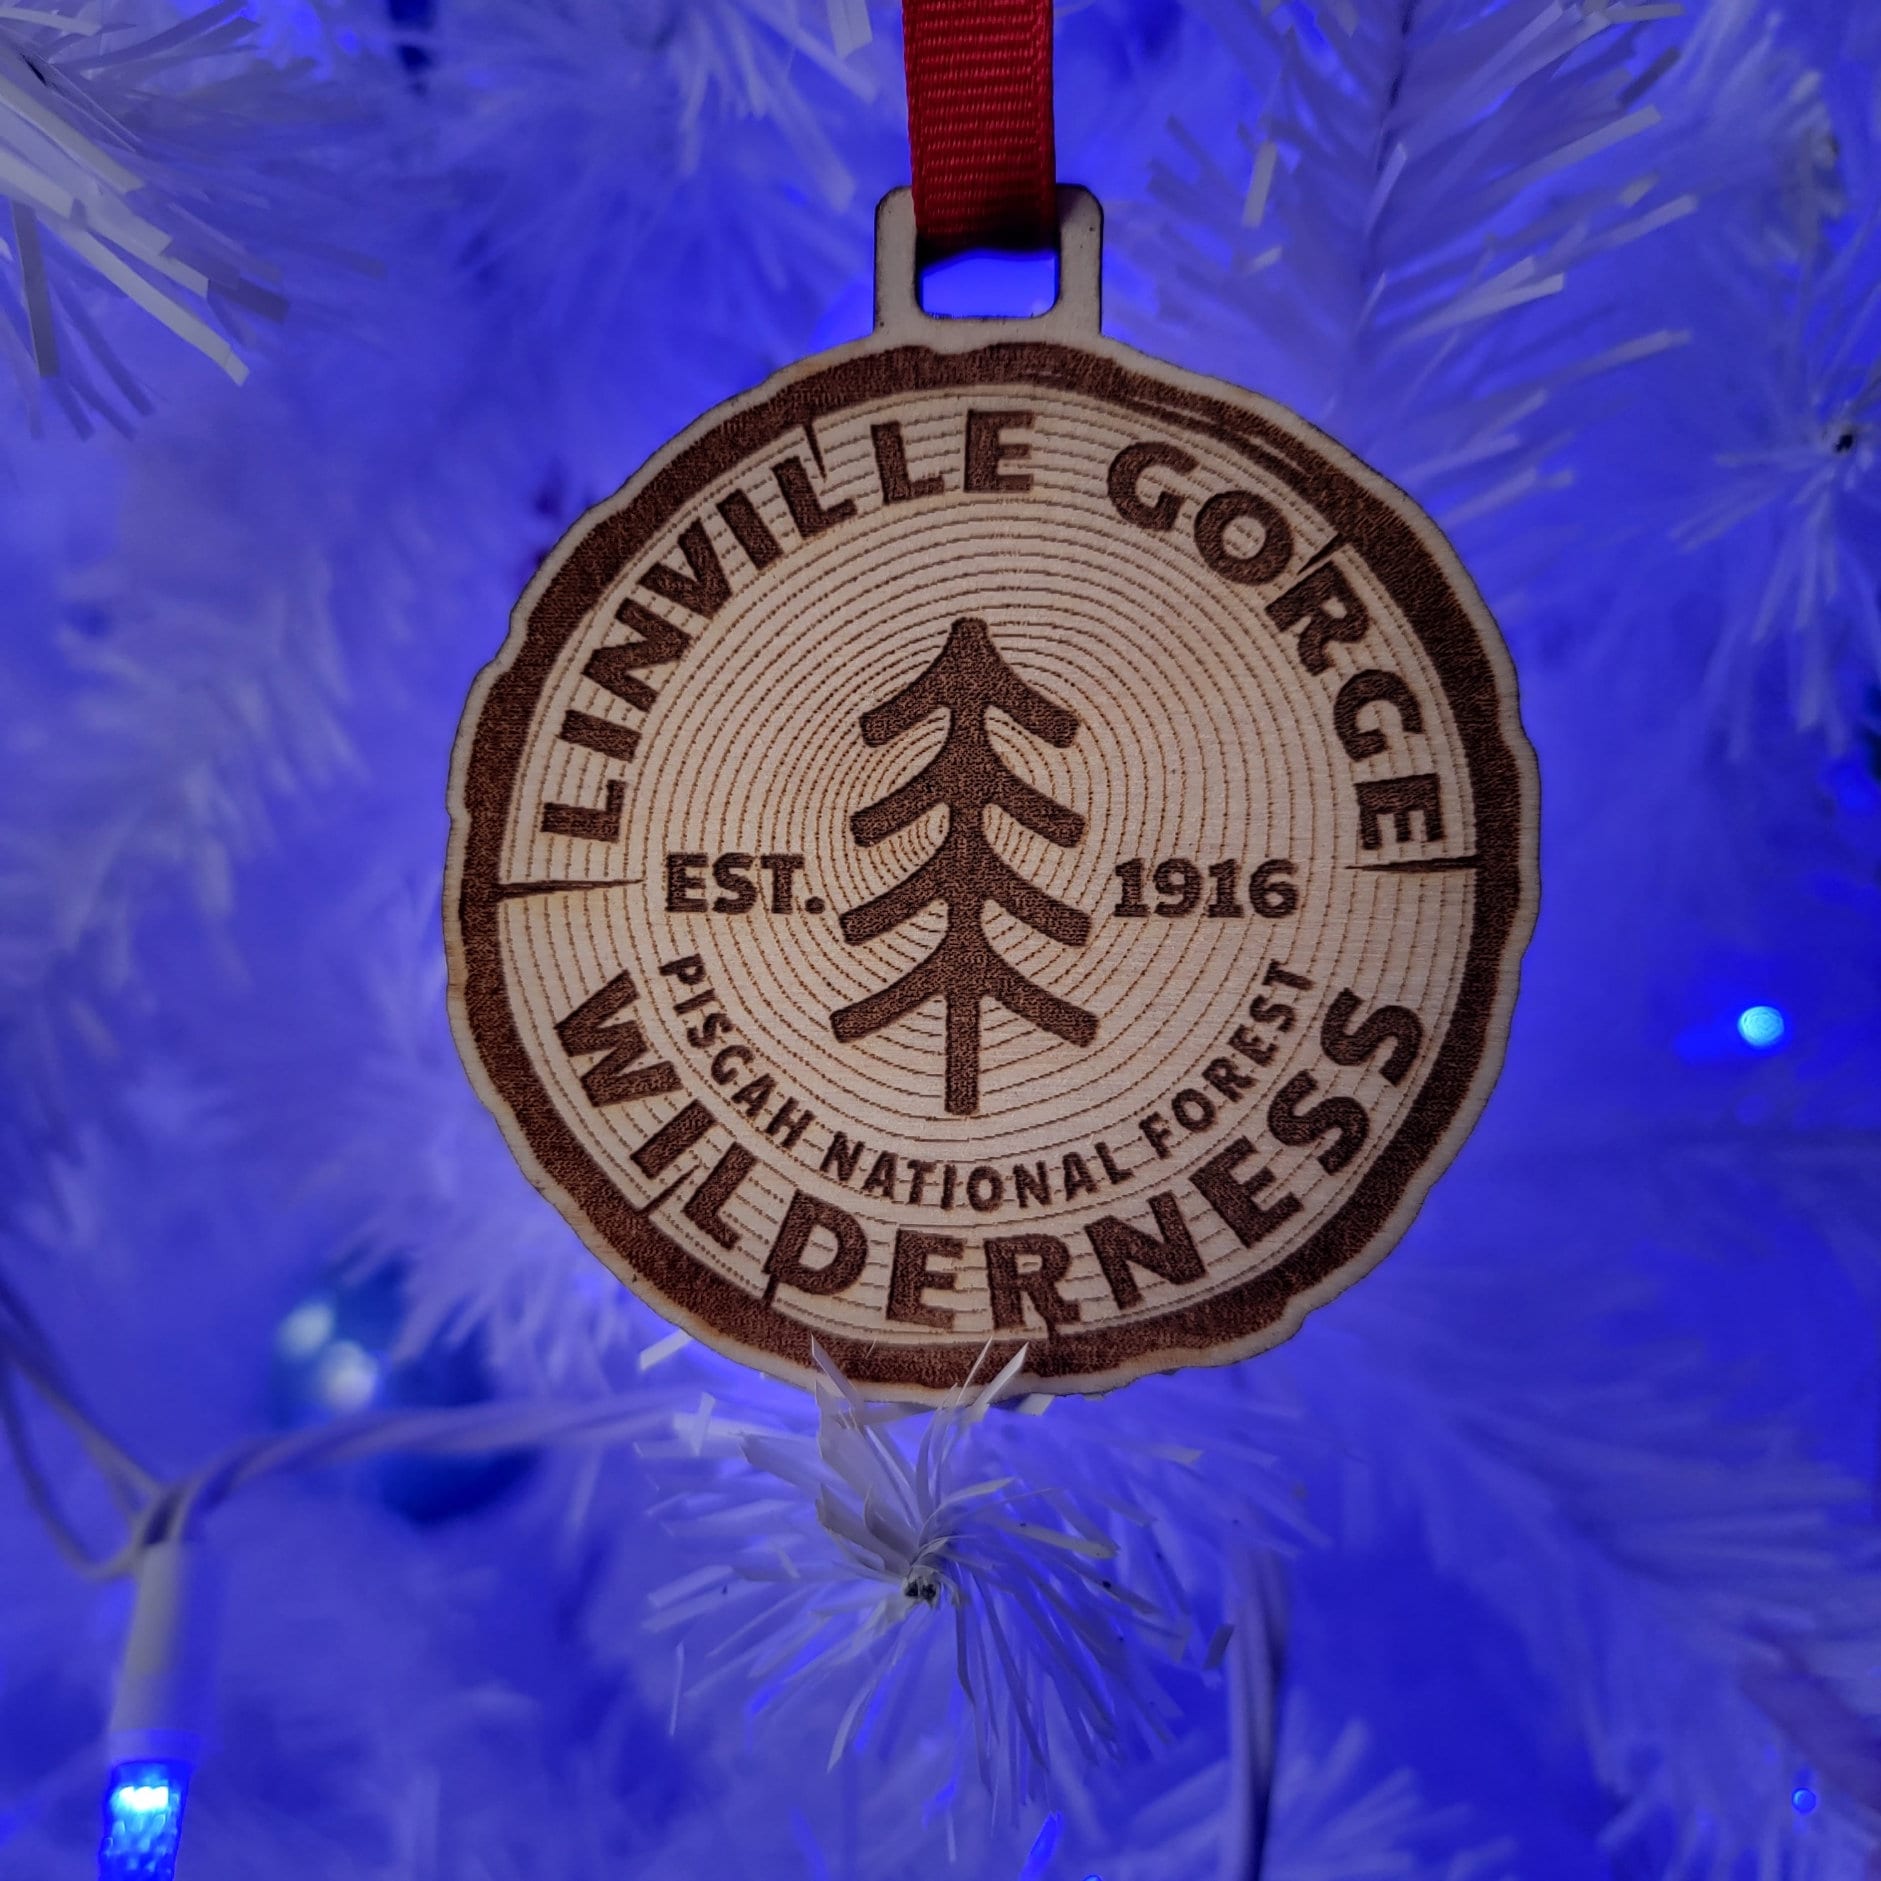 Linville Gorge Wilderness Pisgah National Forest Ornament Christmas Ornaments North Carolina